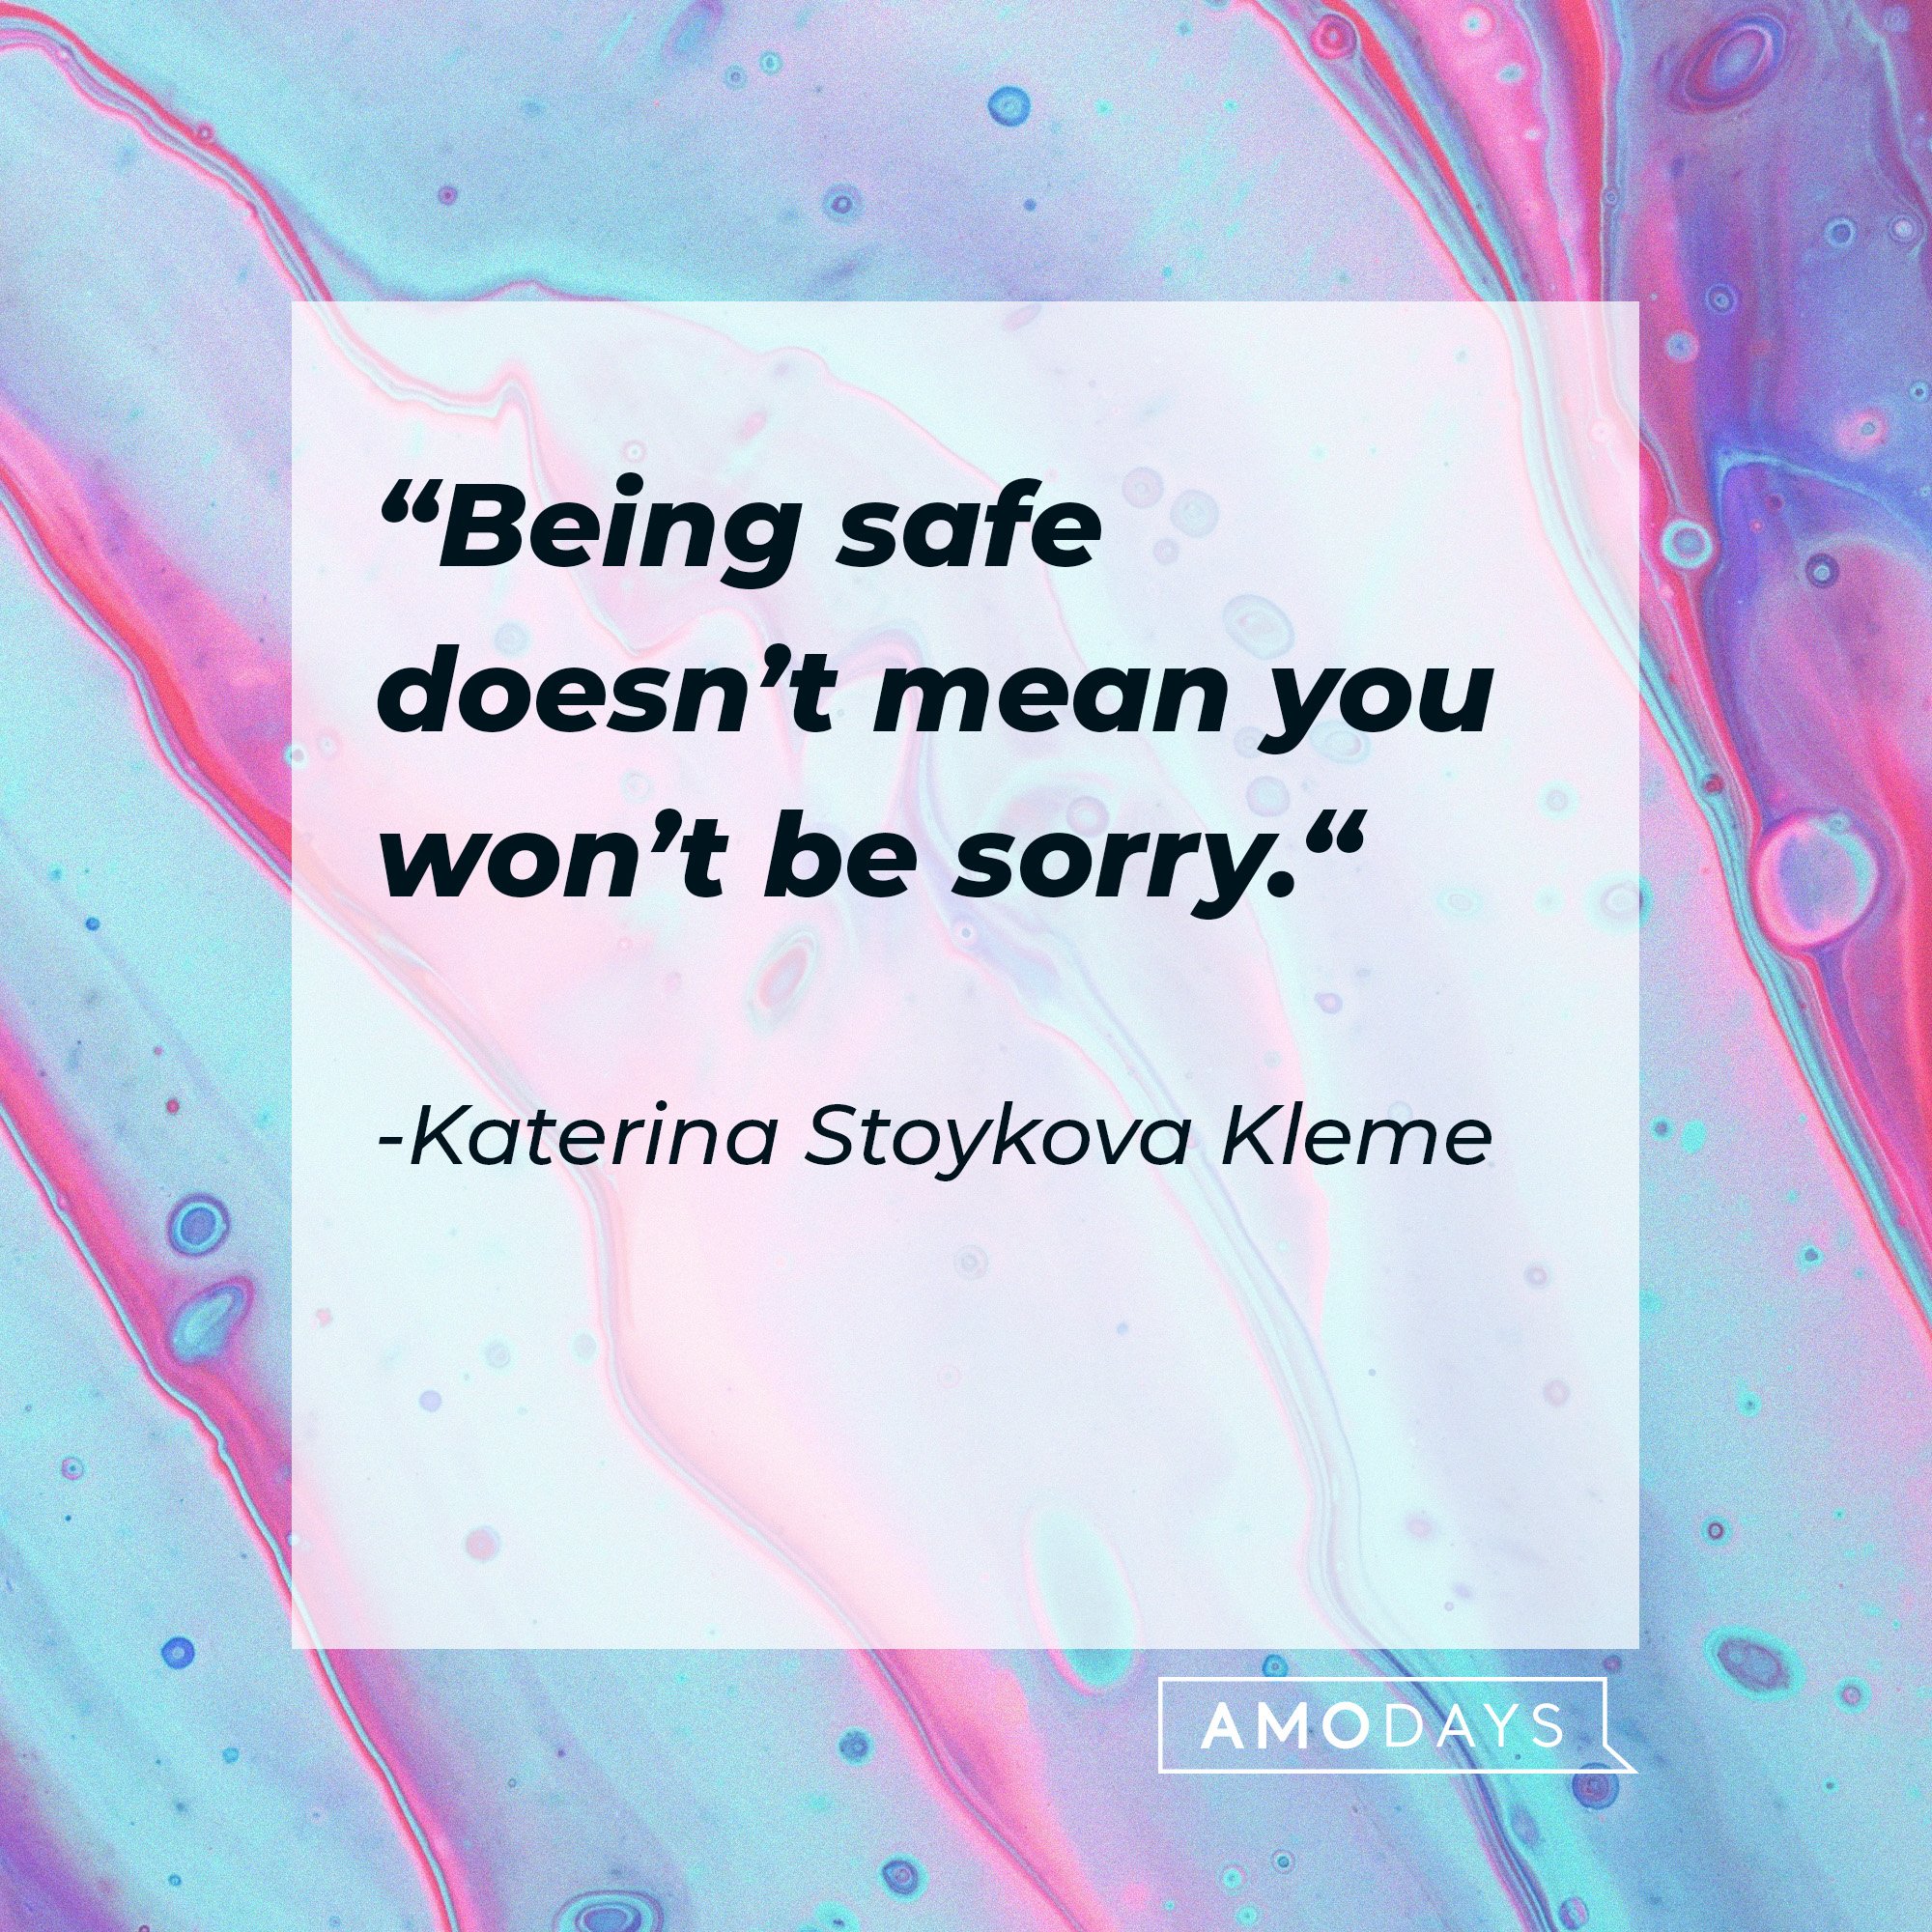  Katerina Stoykova Klemer's quote:  “Being safe doesn’t mean you won’t be sorry.“ | Image: AmoDays